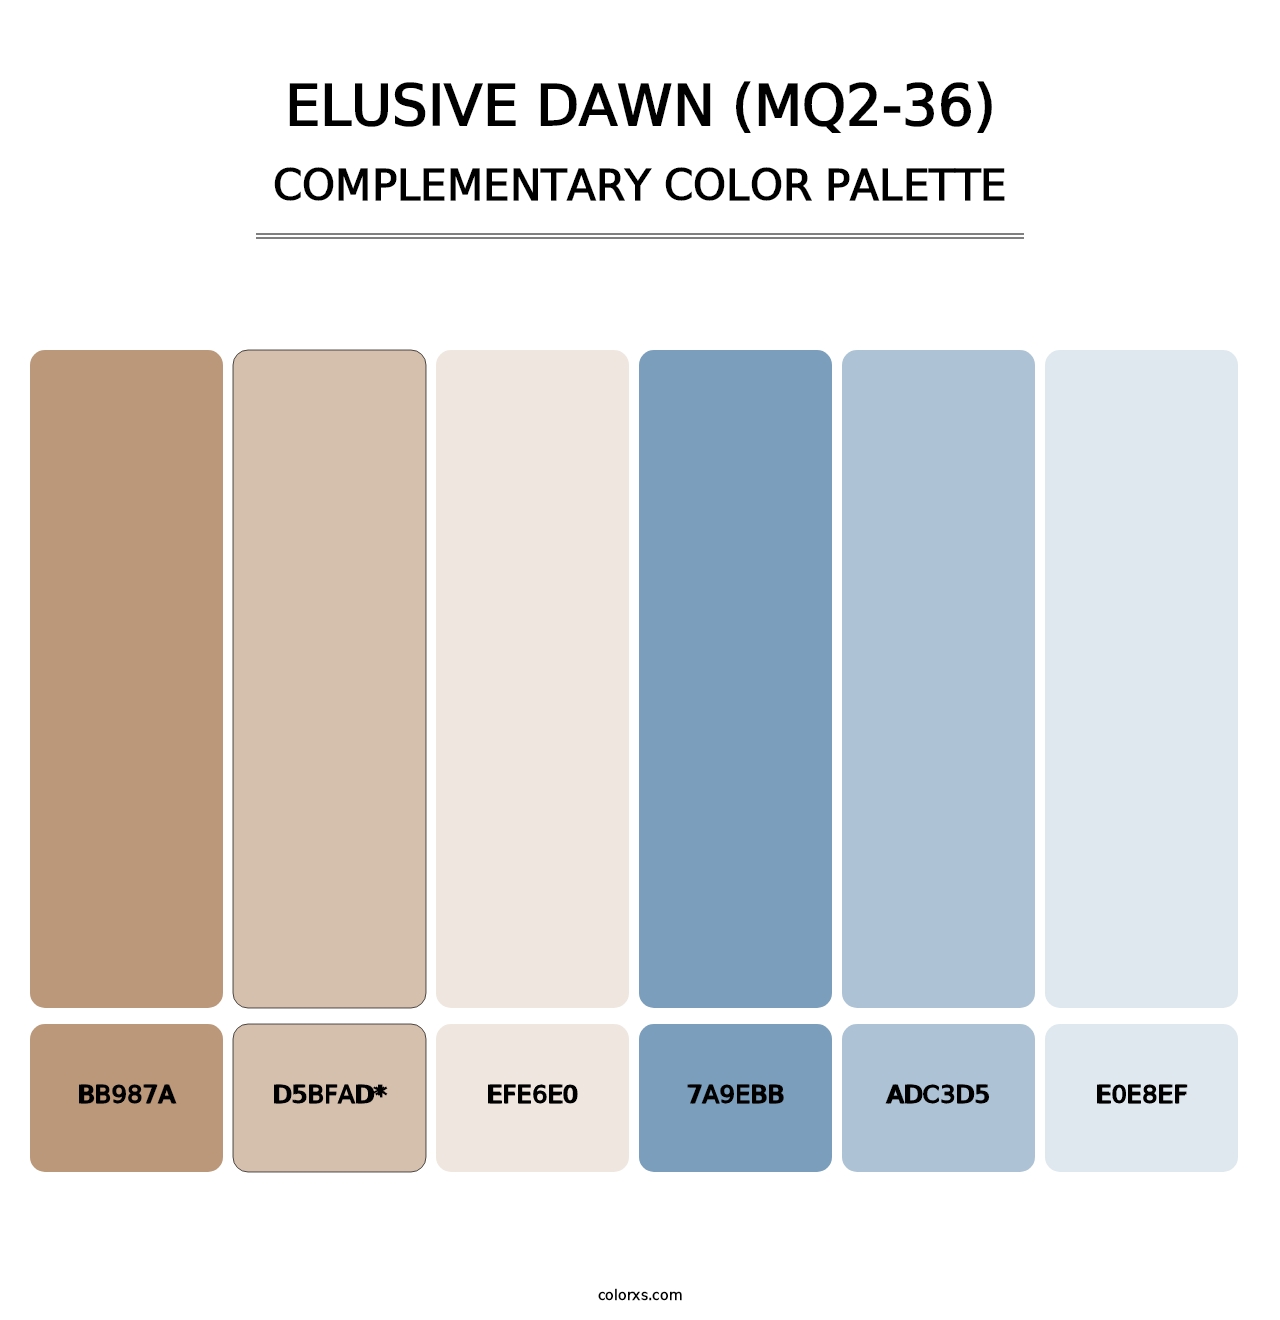 Elusive Dawn (MQ2-36) - Complementary Color Palette